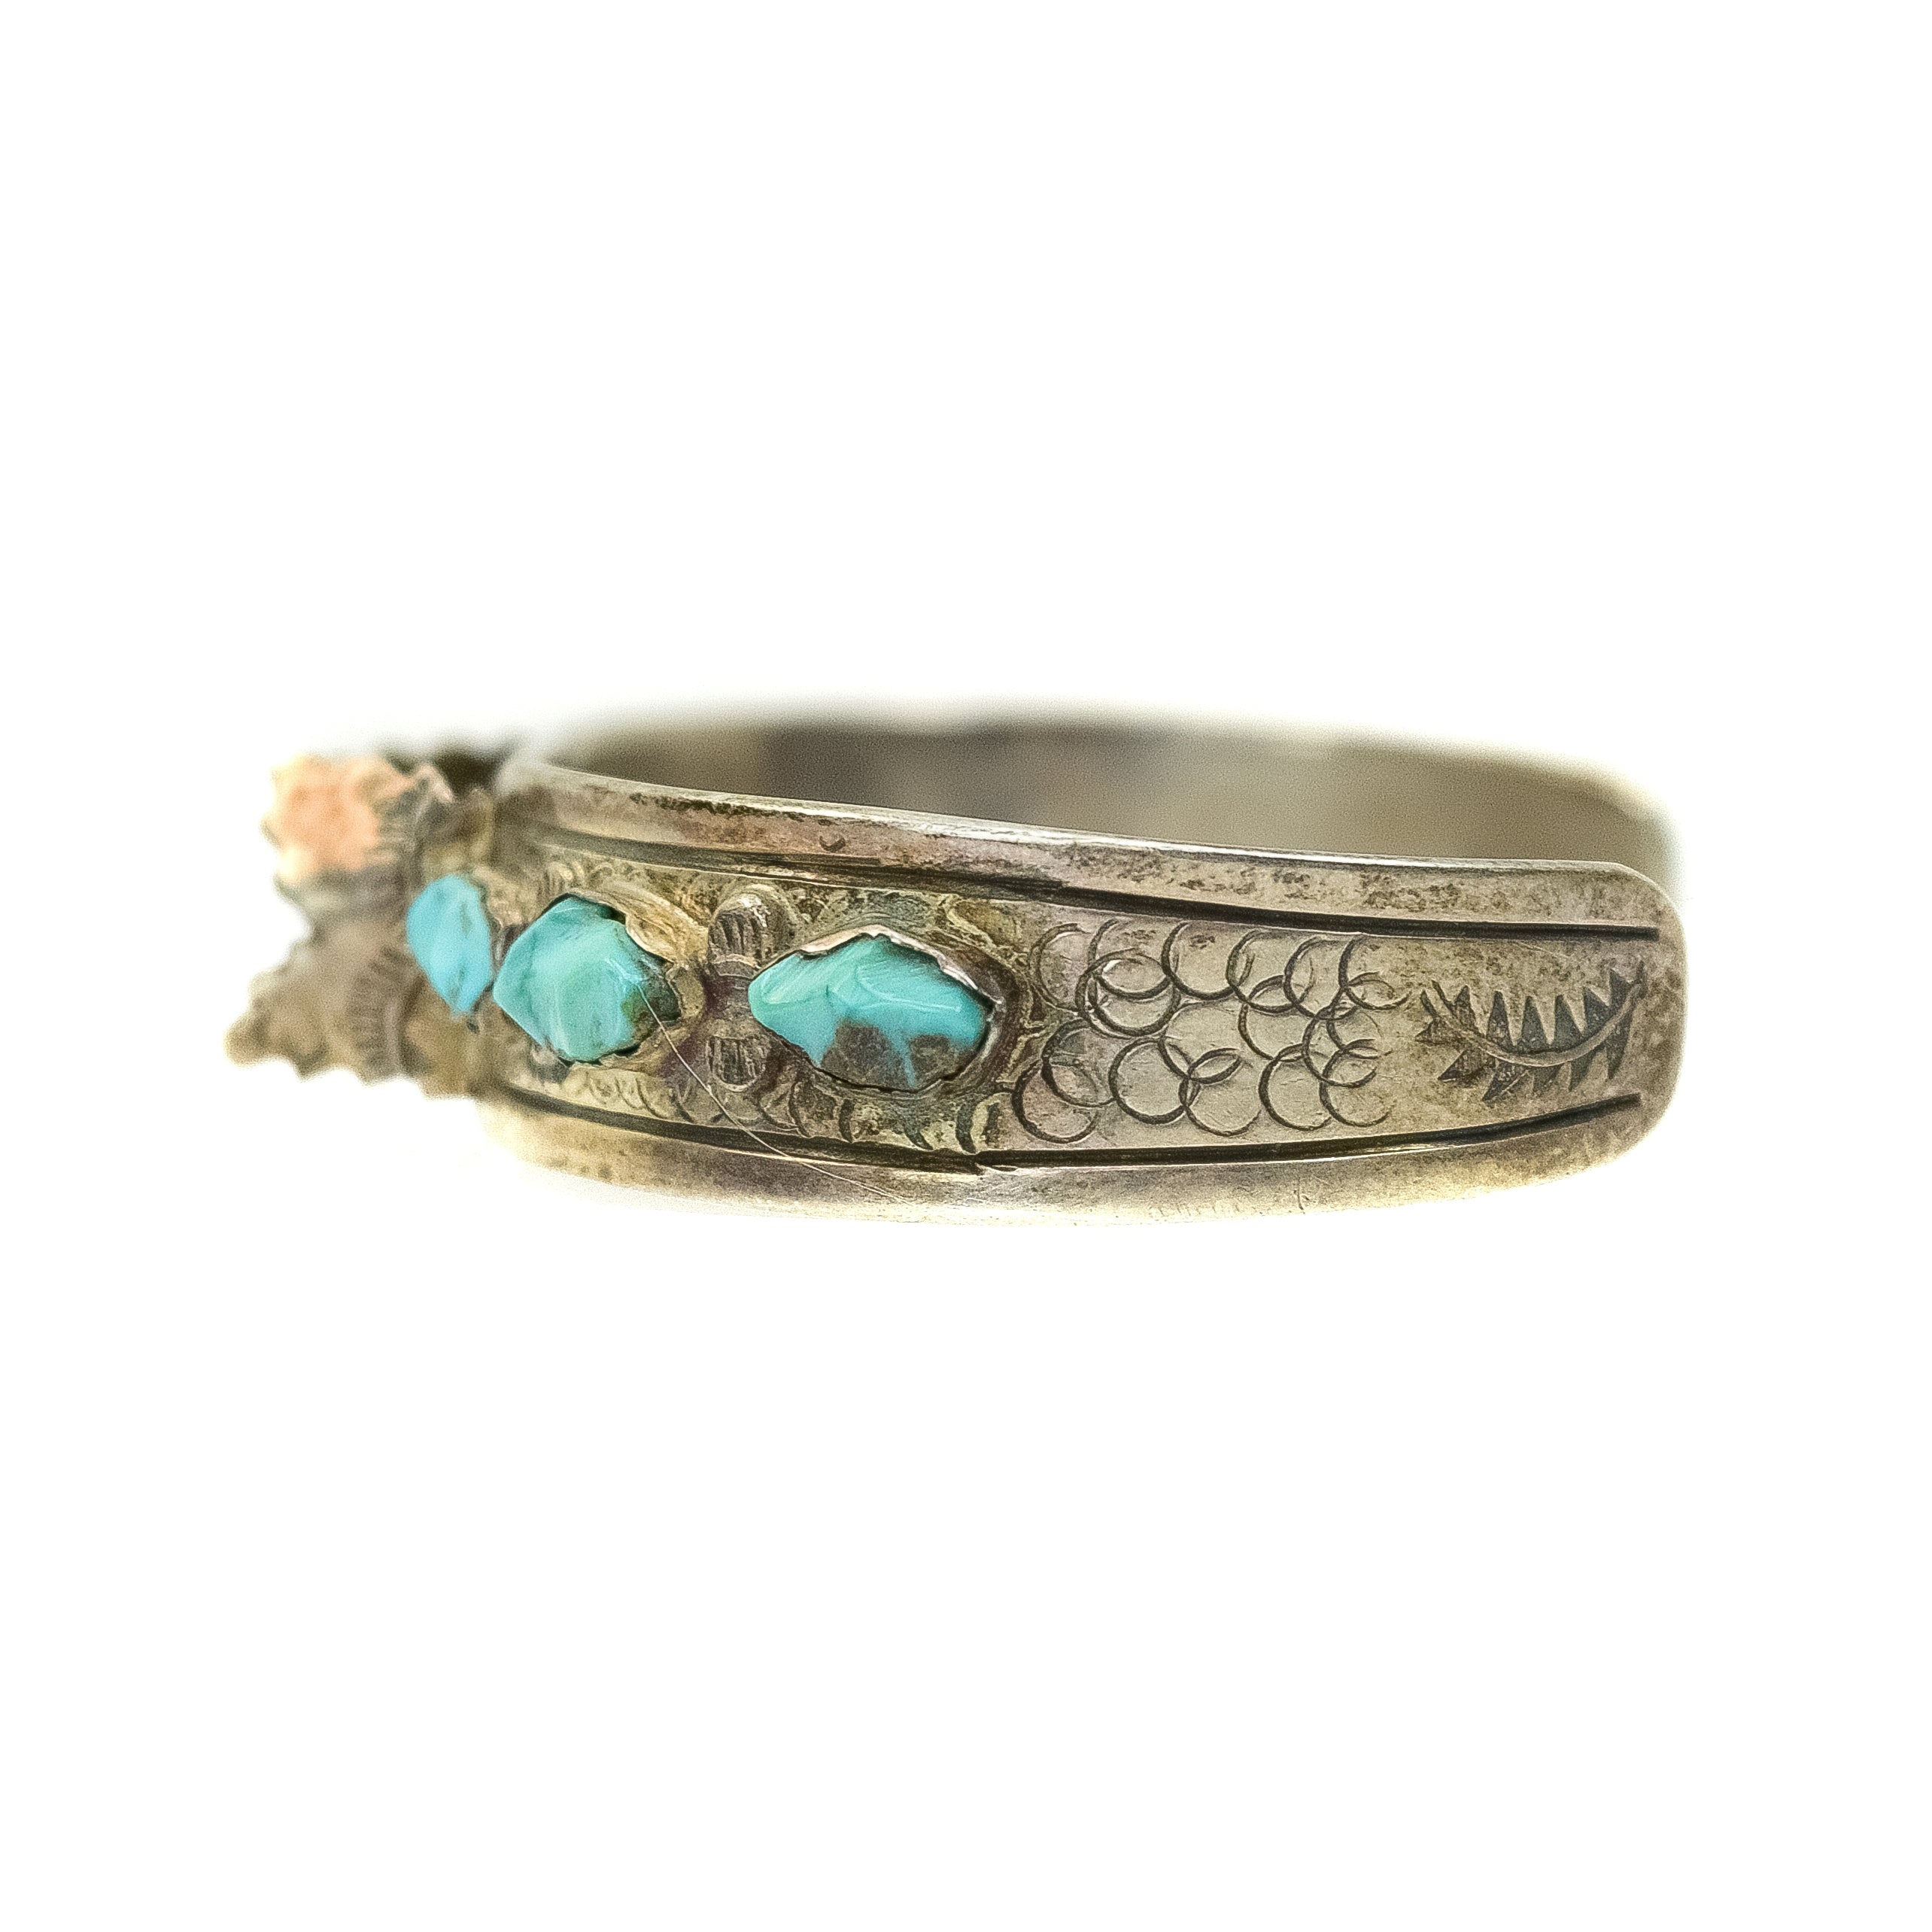 Zuni Turquoise and Silver Watch Band, circa 1960s, Size 7.25 (J7641)